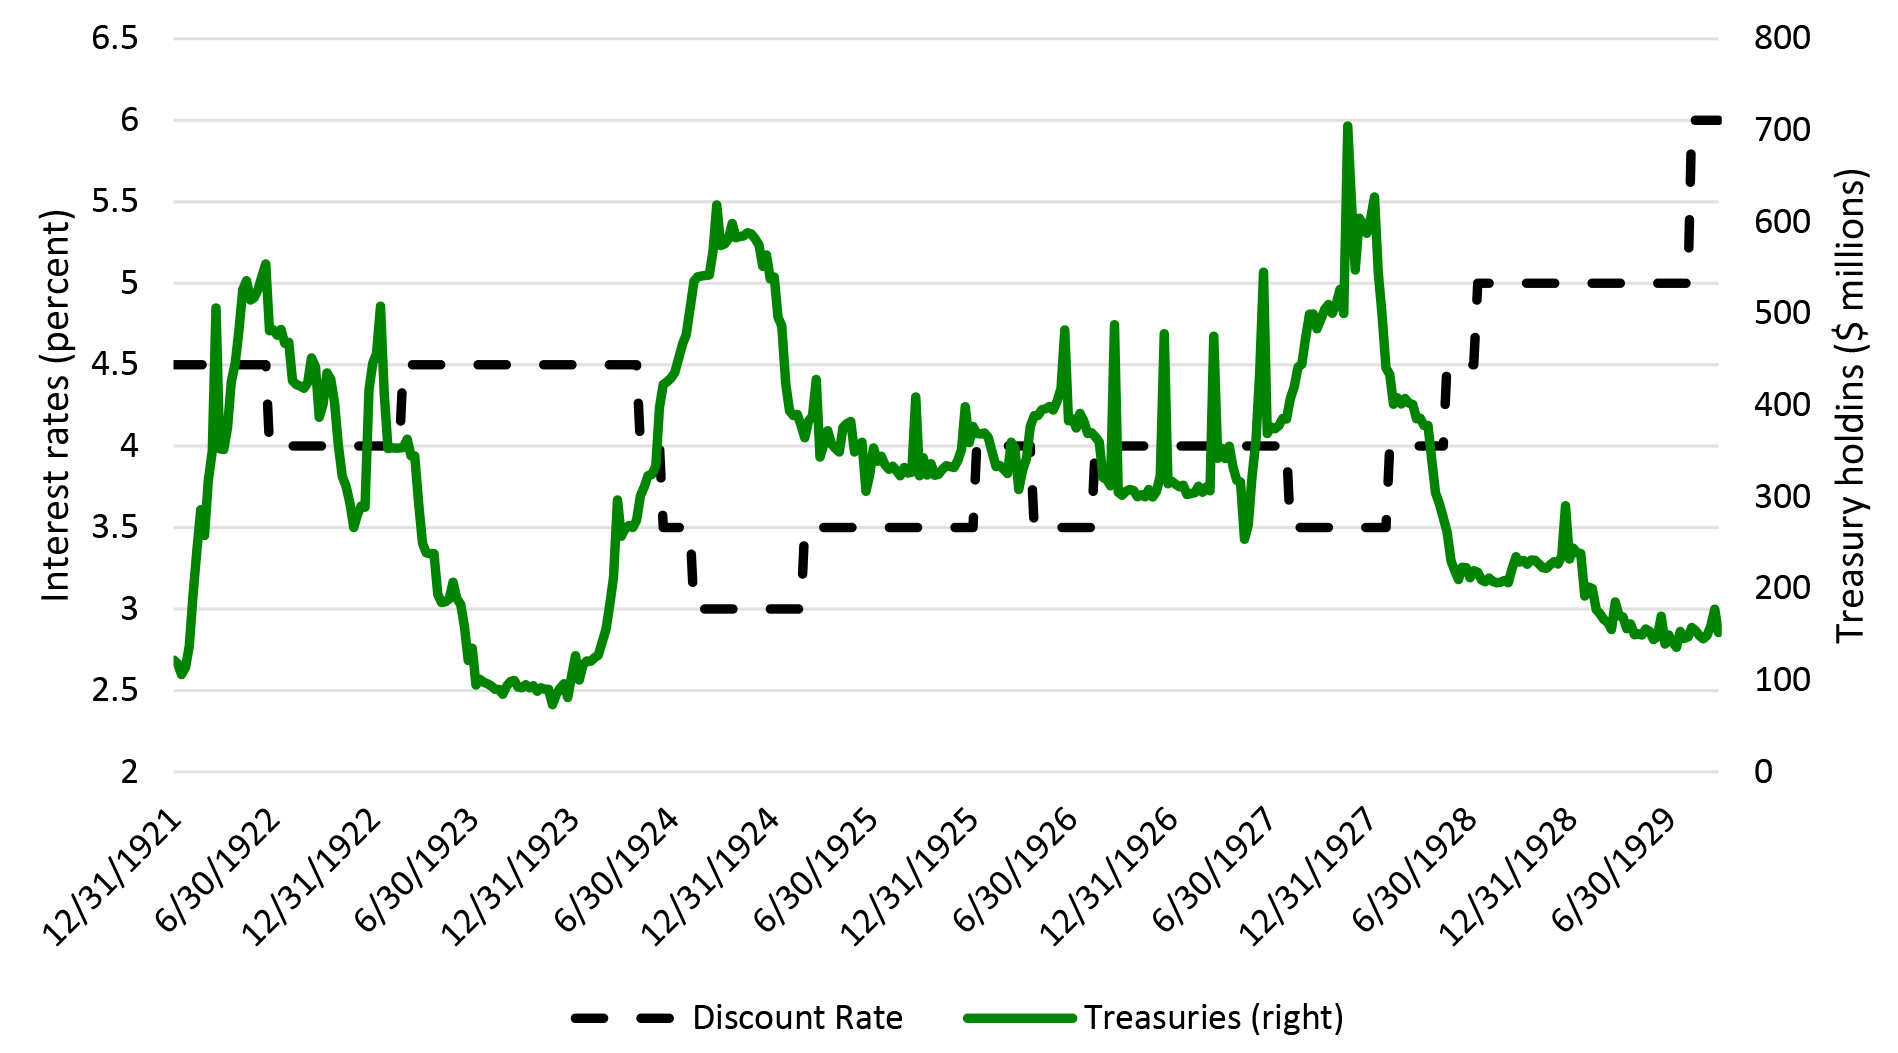 Figure 2: Holdings of Treasury Securities and the Discount Rate. See accessible link for data.